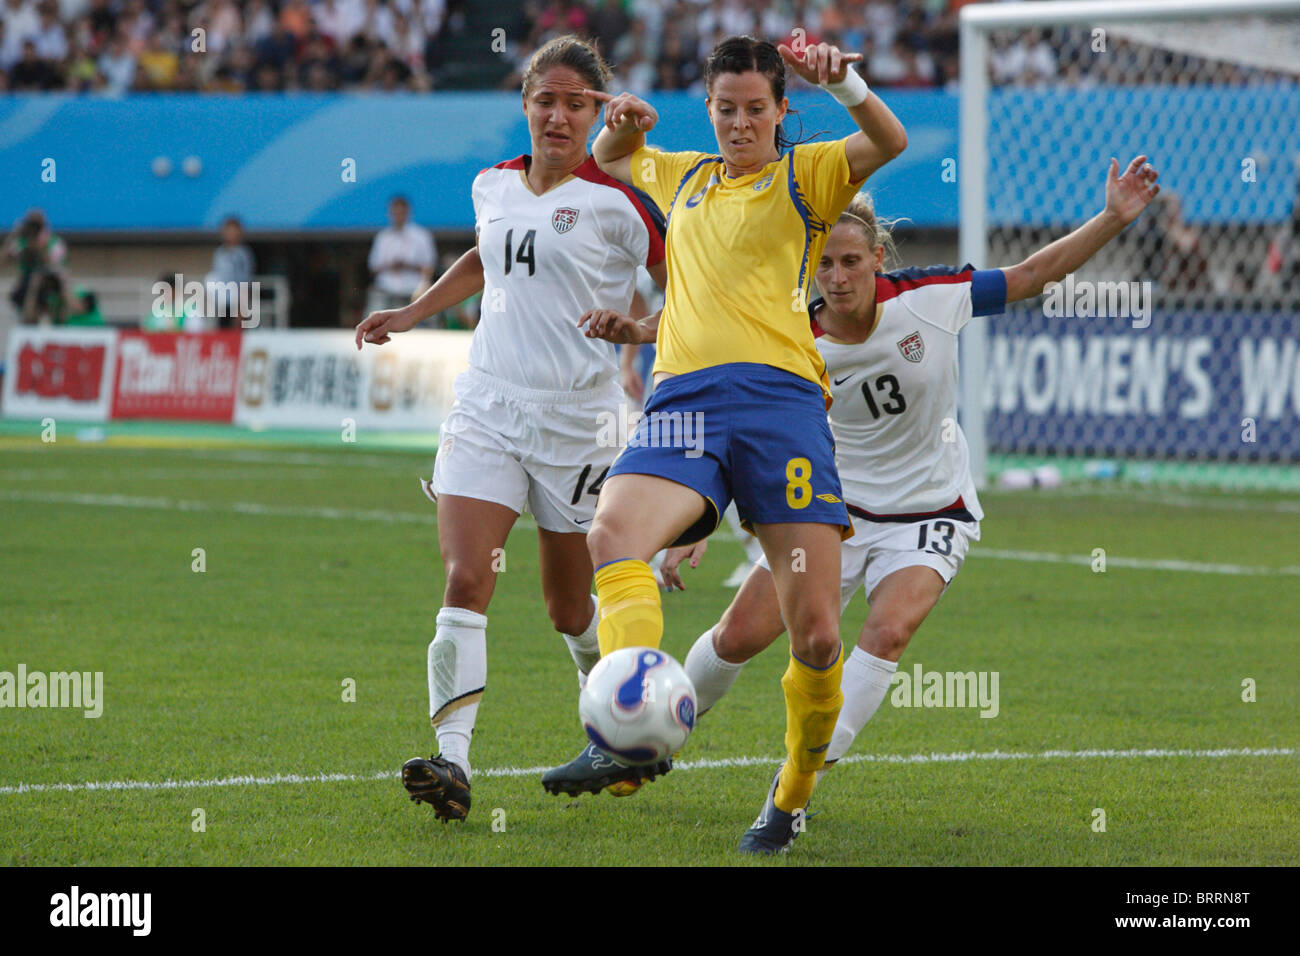 Lotta Schelin of Sweden (8) kicks the ball during a 2007 Women's World Cup match against the United States. Stock Photo